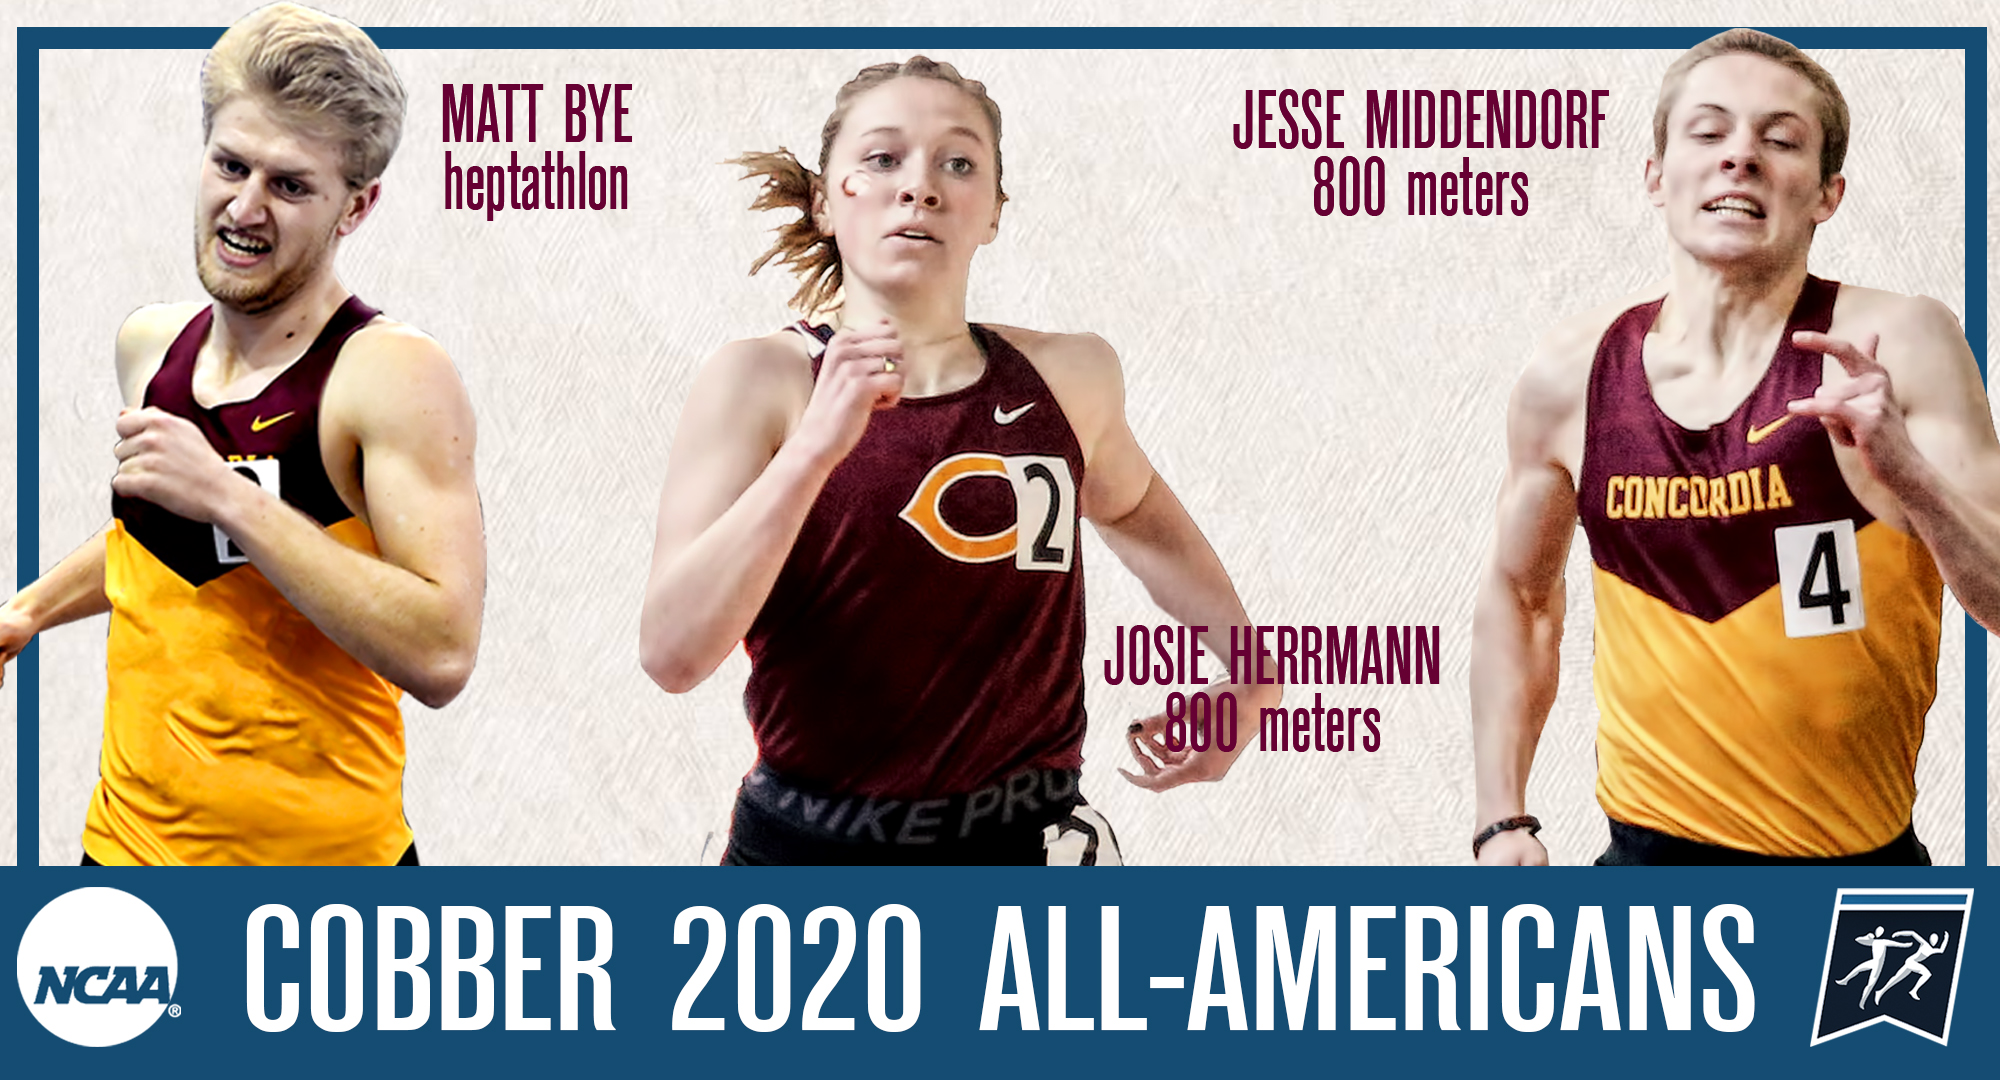 Matt Bye, Josie Herrmann and Jesse Middendorf were all named Indoor All-Americans by the NCAA as a result of their national qualifying marks in March.